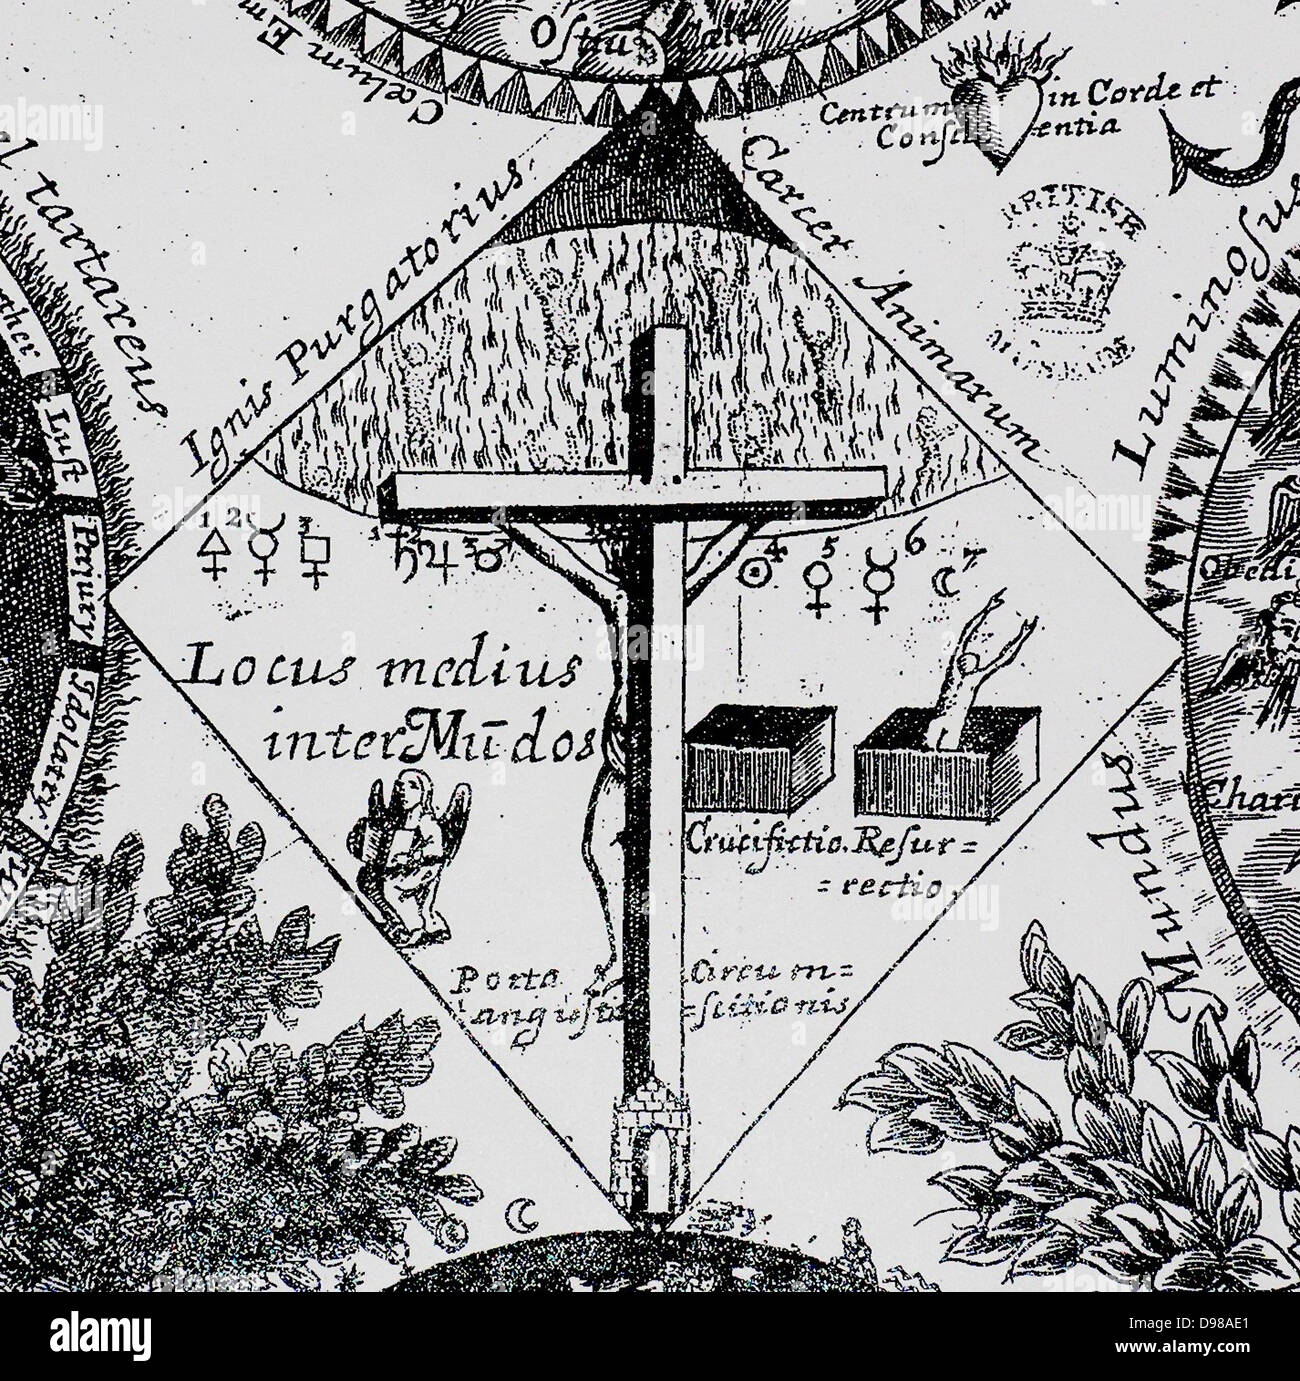 Manfred Brod, ‘A Radical Network in the English Revolution: John Pordage and his Circle, 1646-54’  Mundorum explicatio, or, The explanation of an hieroglyphical figure wherein are couched the mysteries of the external, internal, and eternal worlds, showing the true progress of a soul from the court of Babylon to the city of Jerusalem, from the Adamical fallen state to the regenerate and angelical Stock Photo